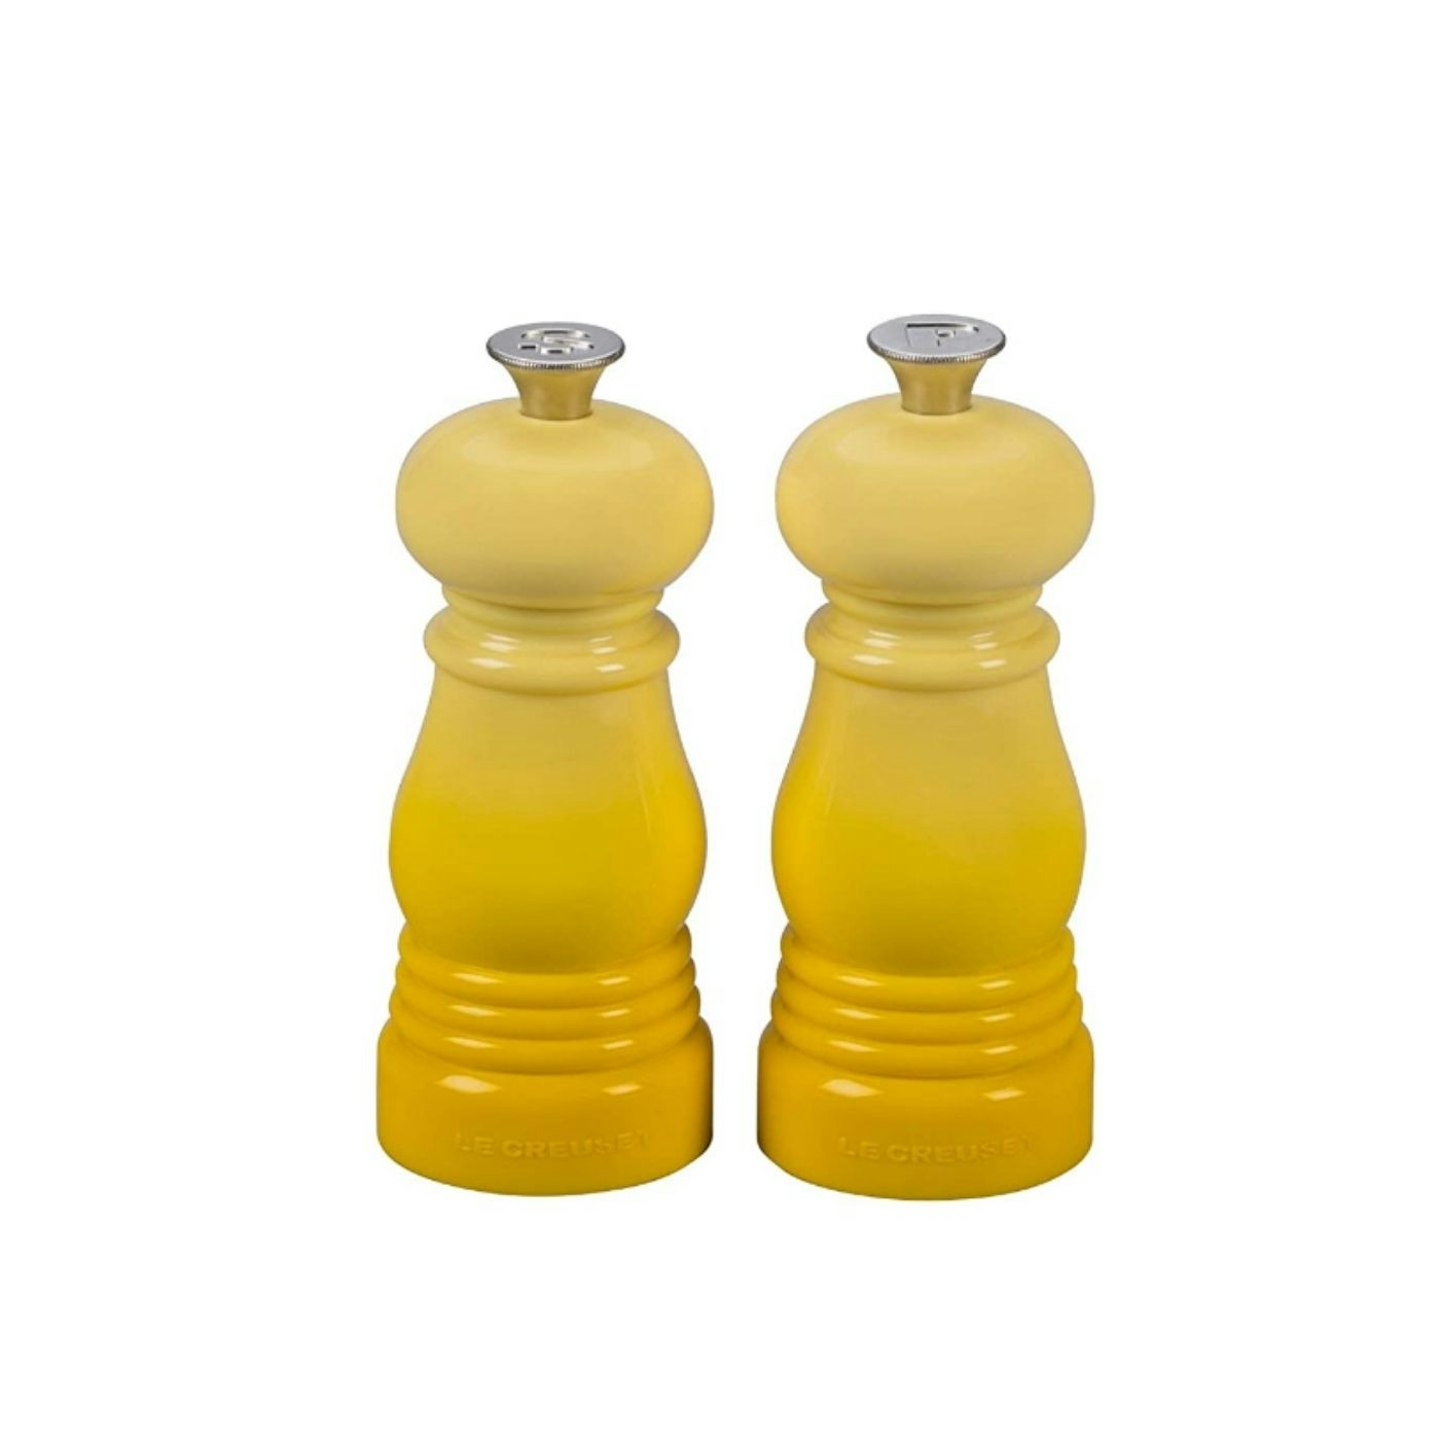 Le Creuset Classic Salt & Pepper Mill Set in Yellow